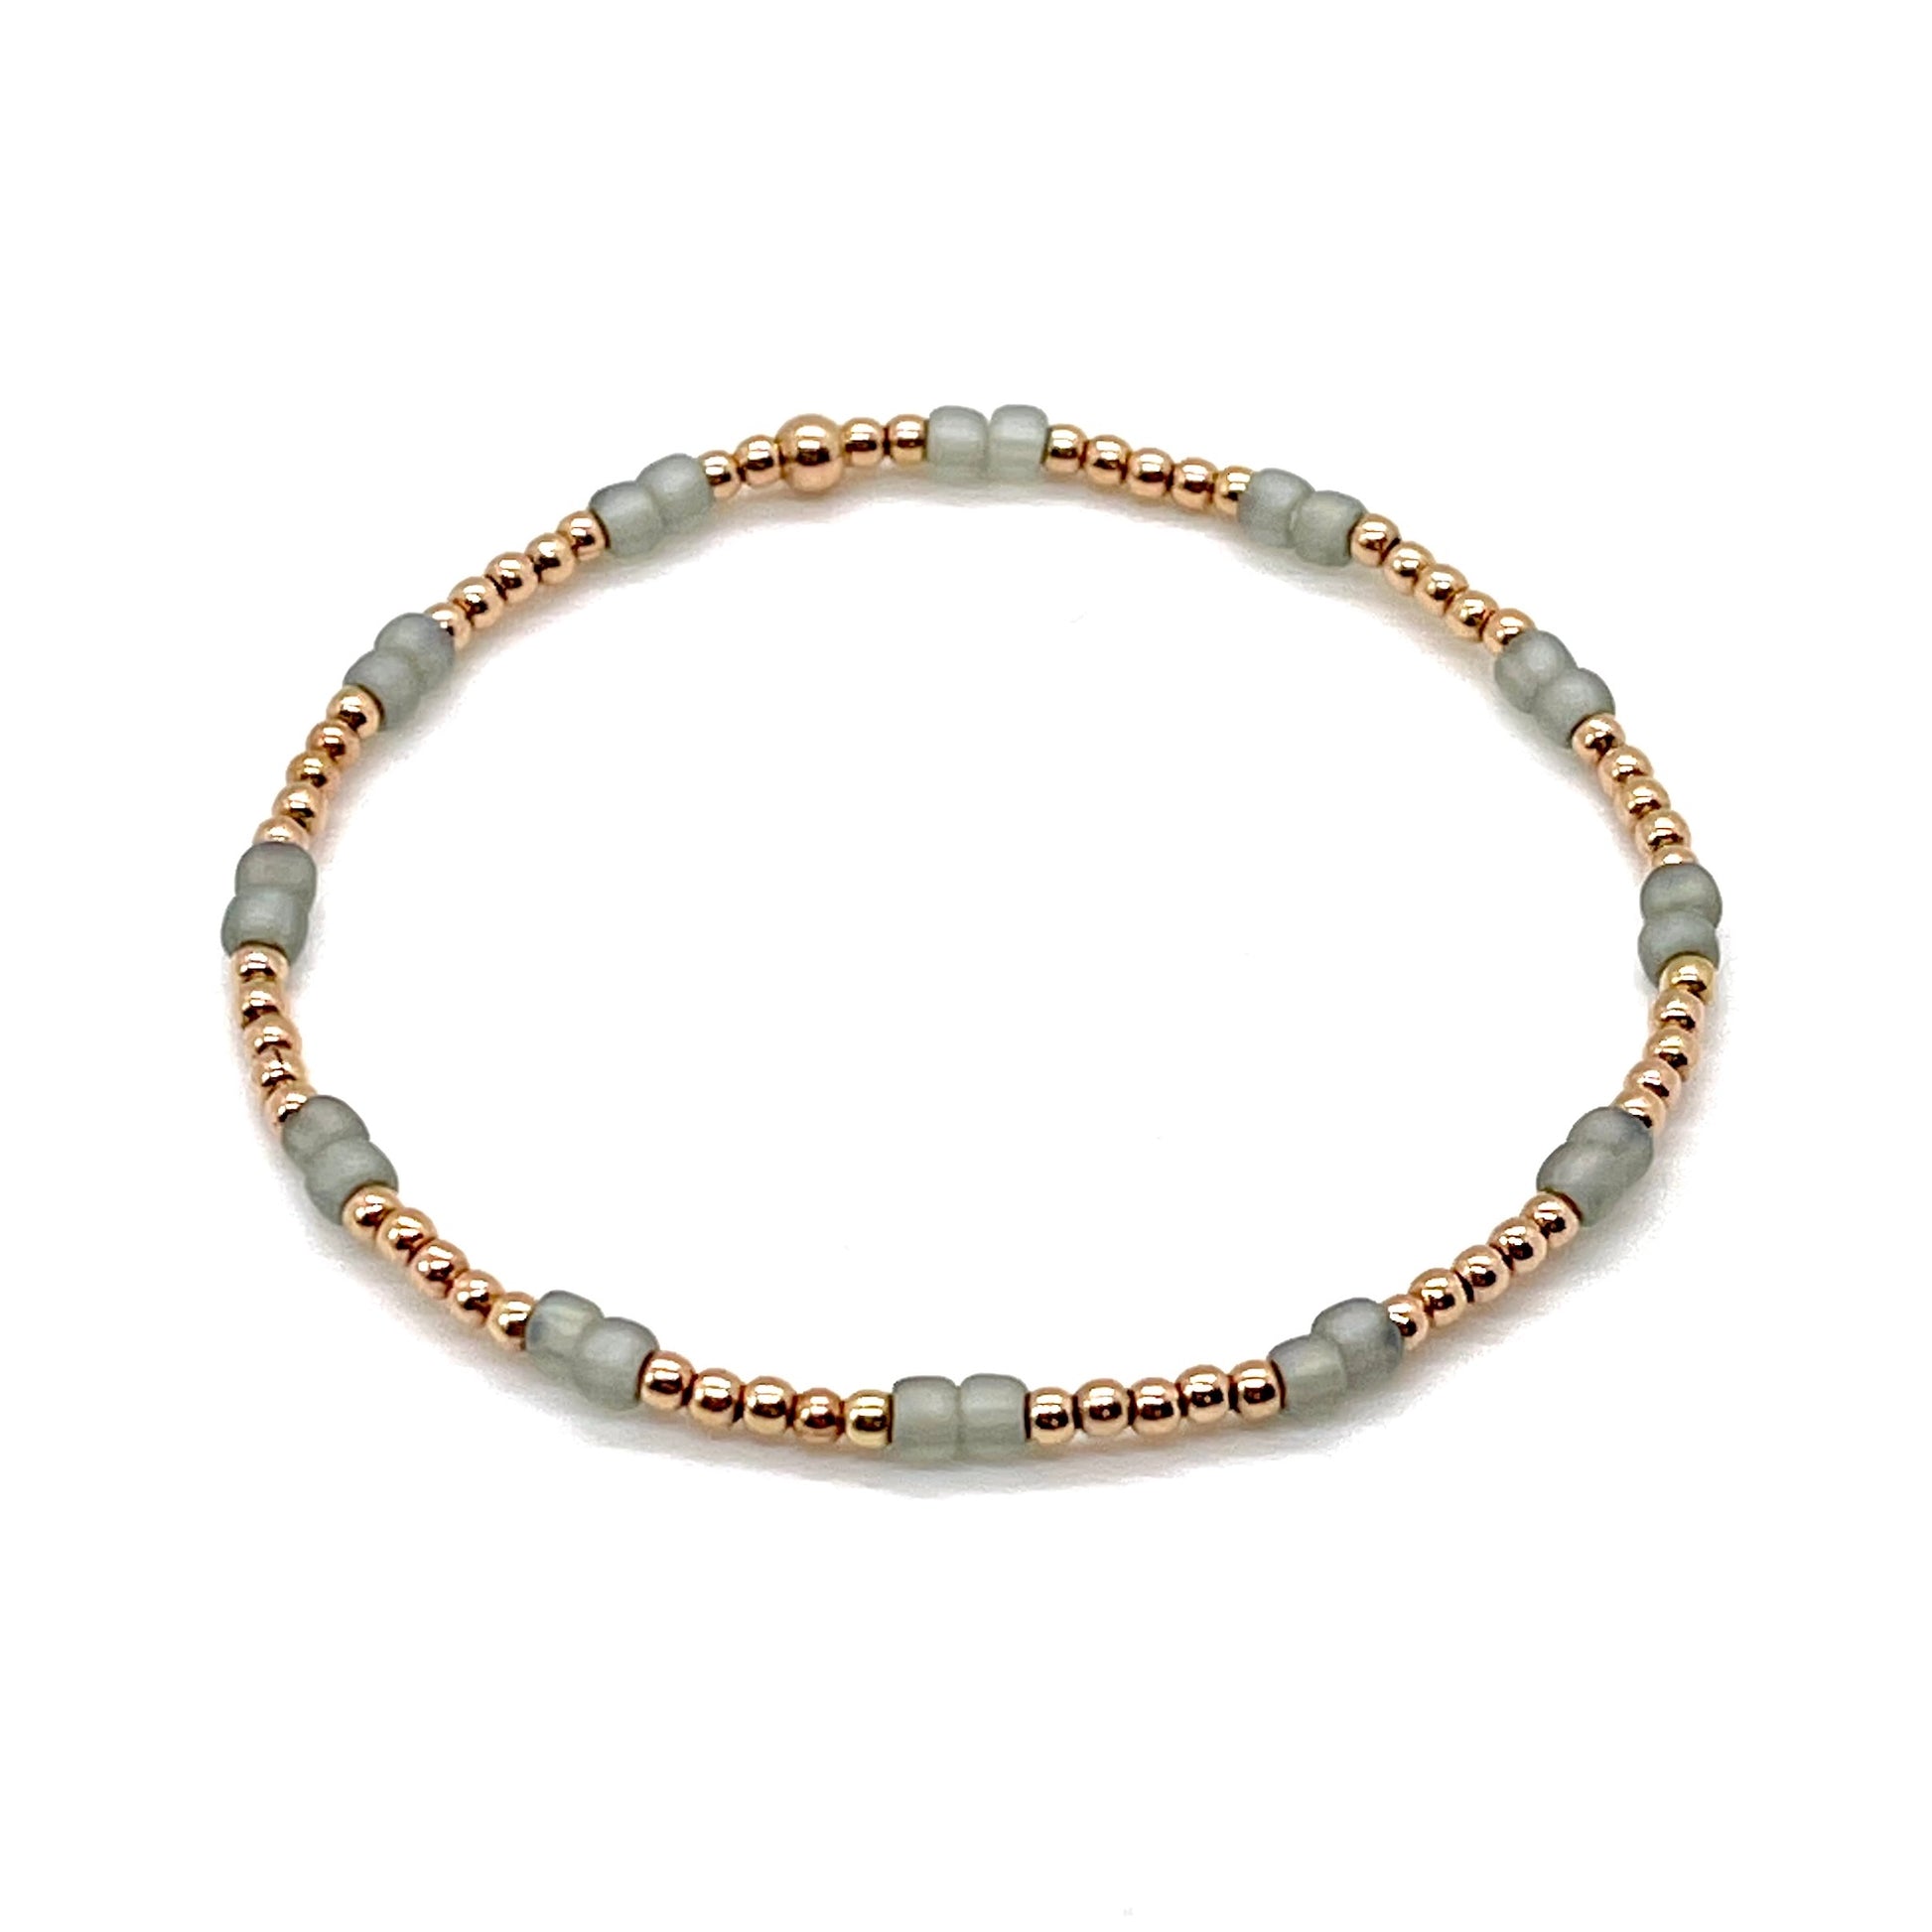 Rose gold stretch bracelet with 2mm 14K gold filled beads and matte green/gray seed beads.